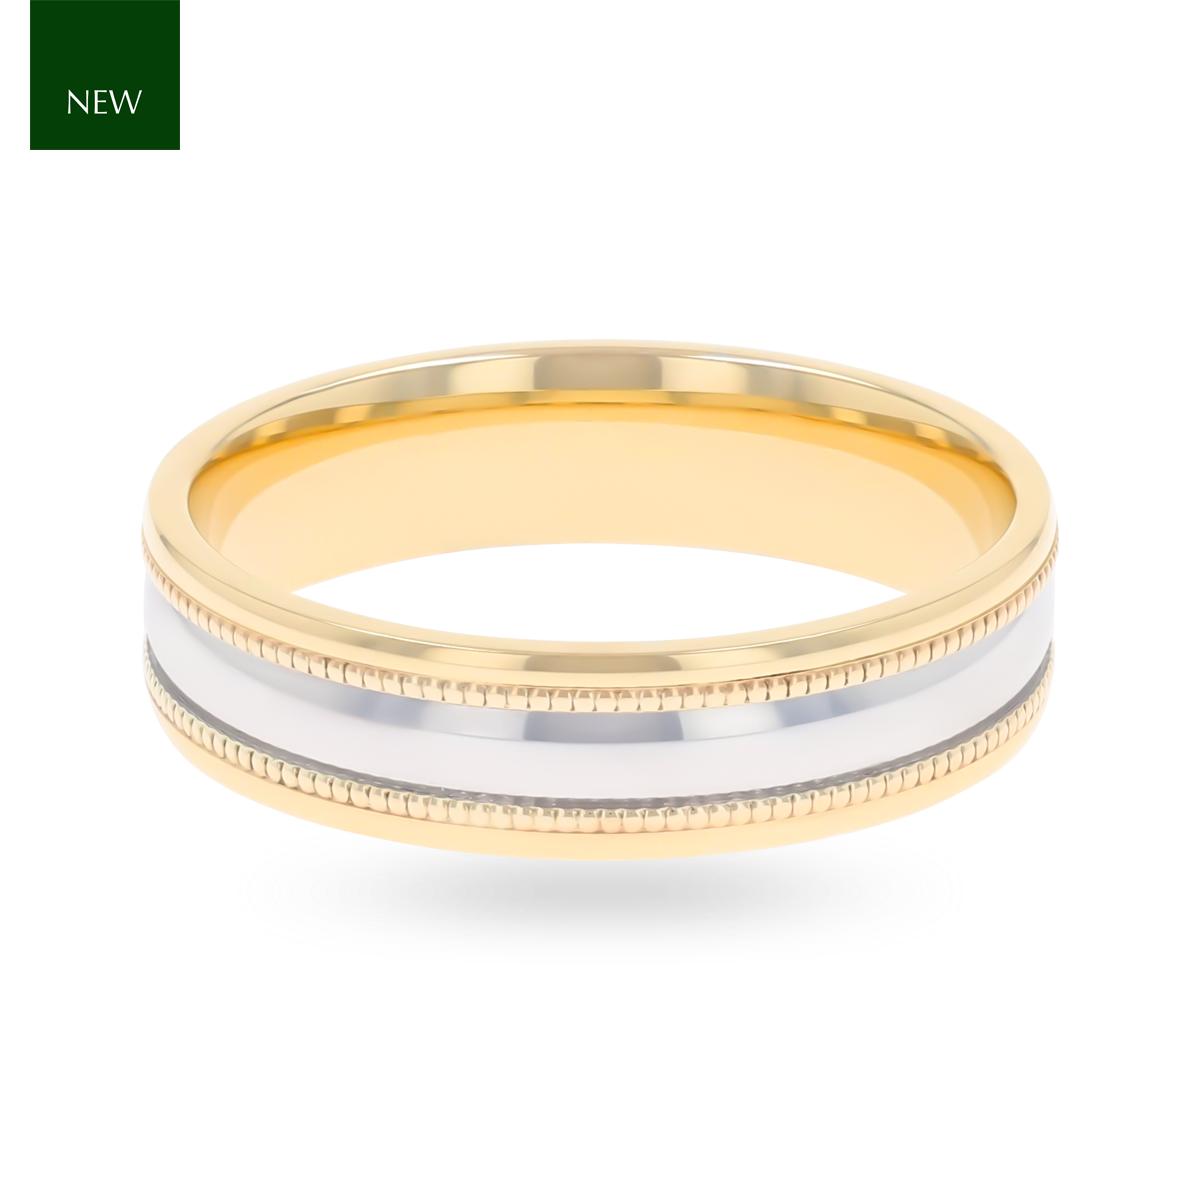 9ct Two Colour Gold Mille-Grain Edge Polished Wedding Band